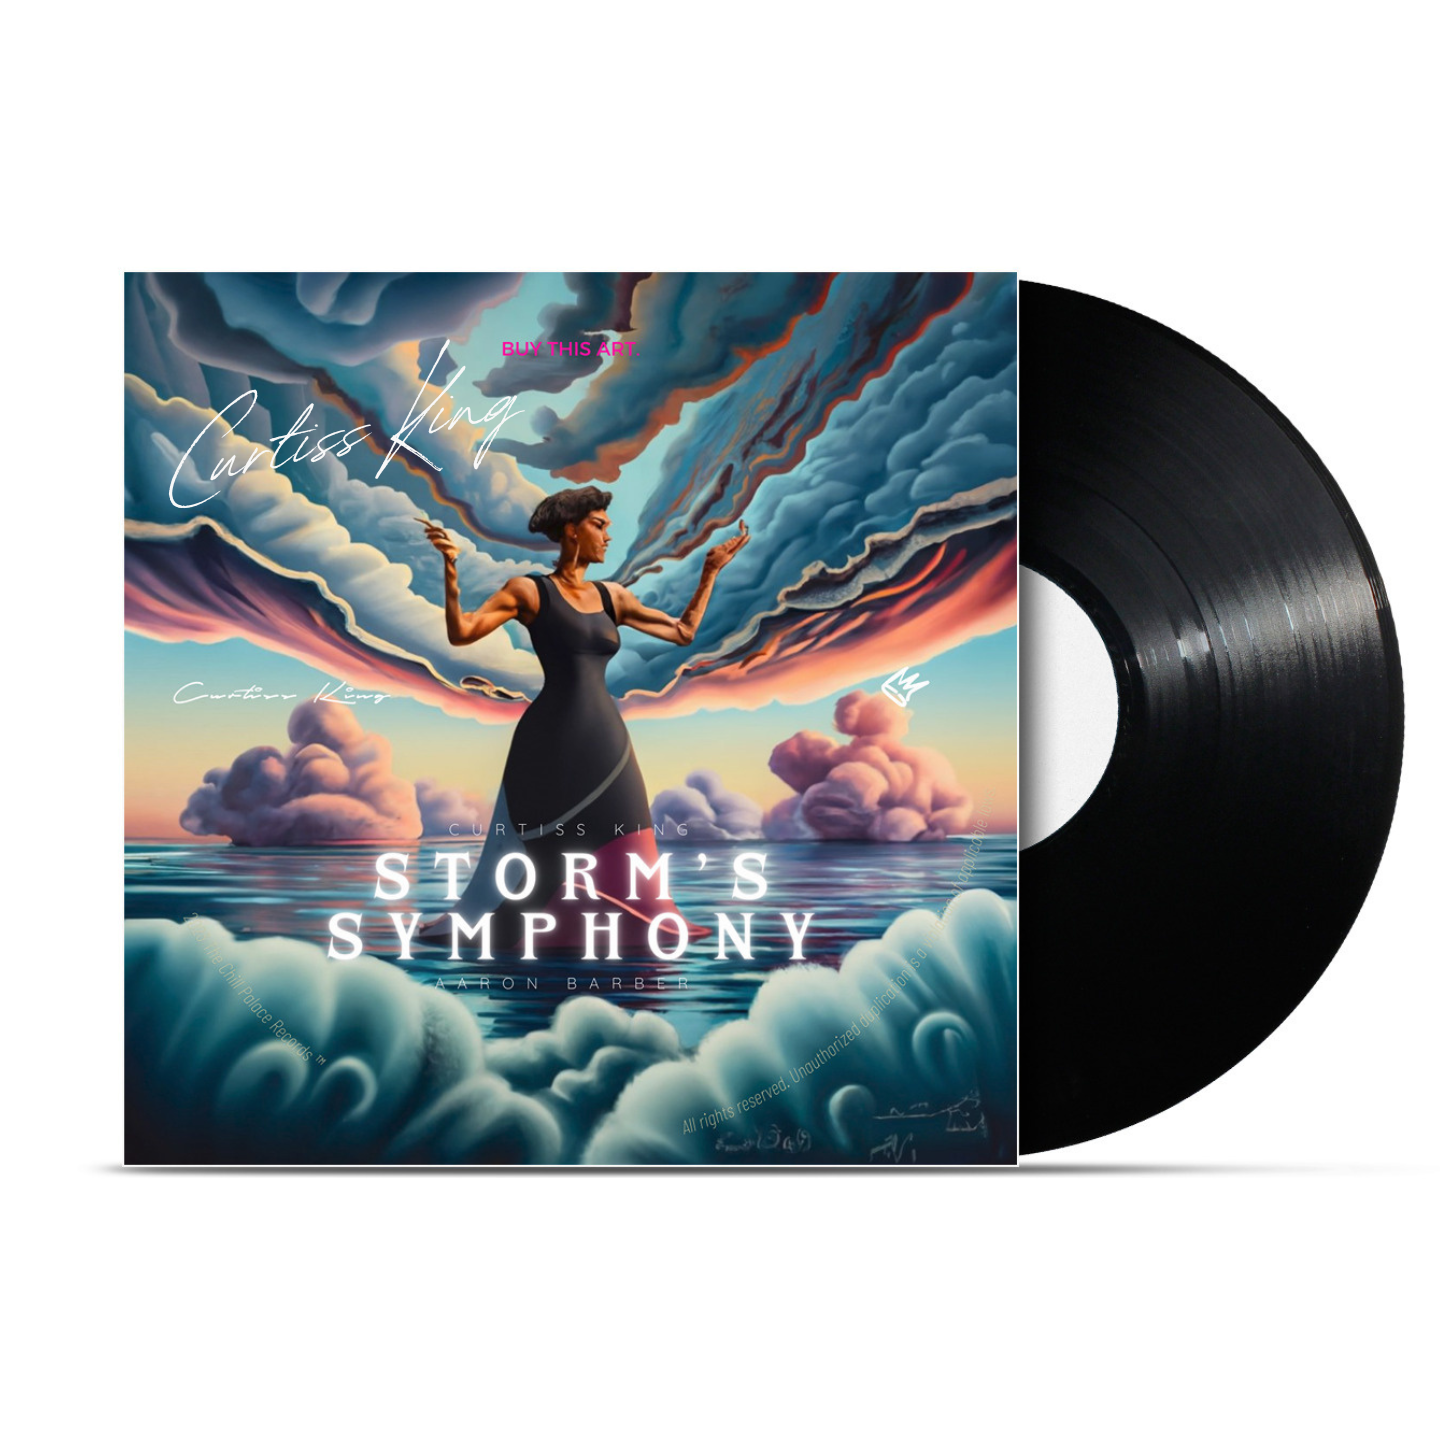 Storm's Symphony by Curtiss King & Aaron Barber